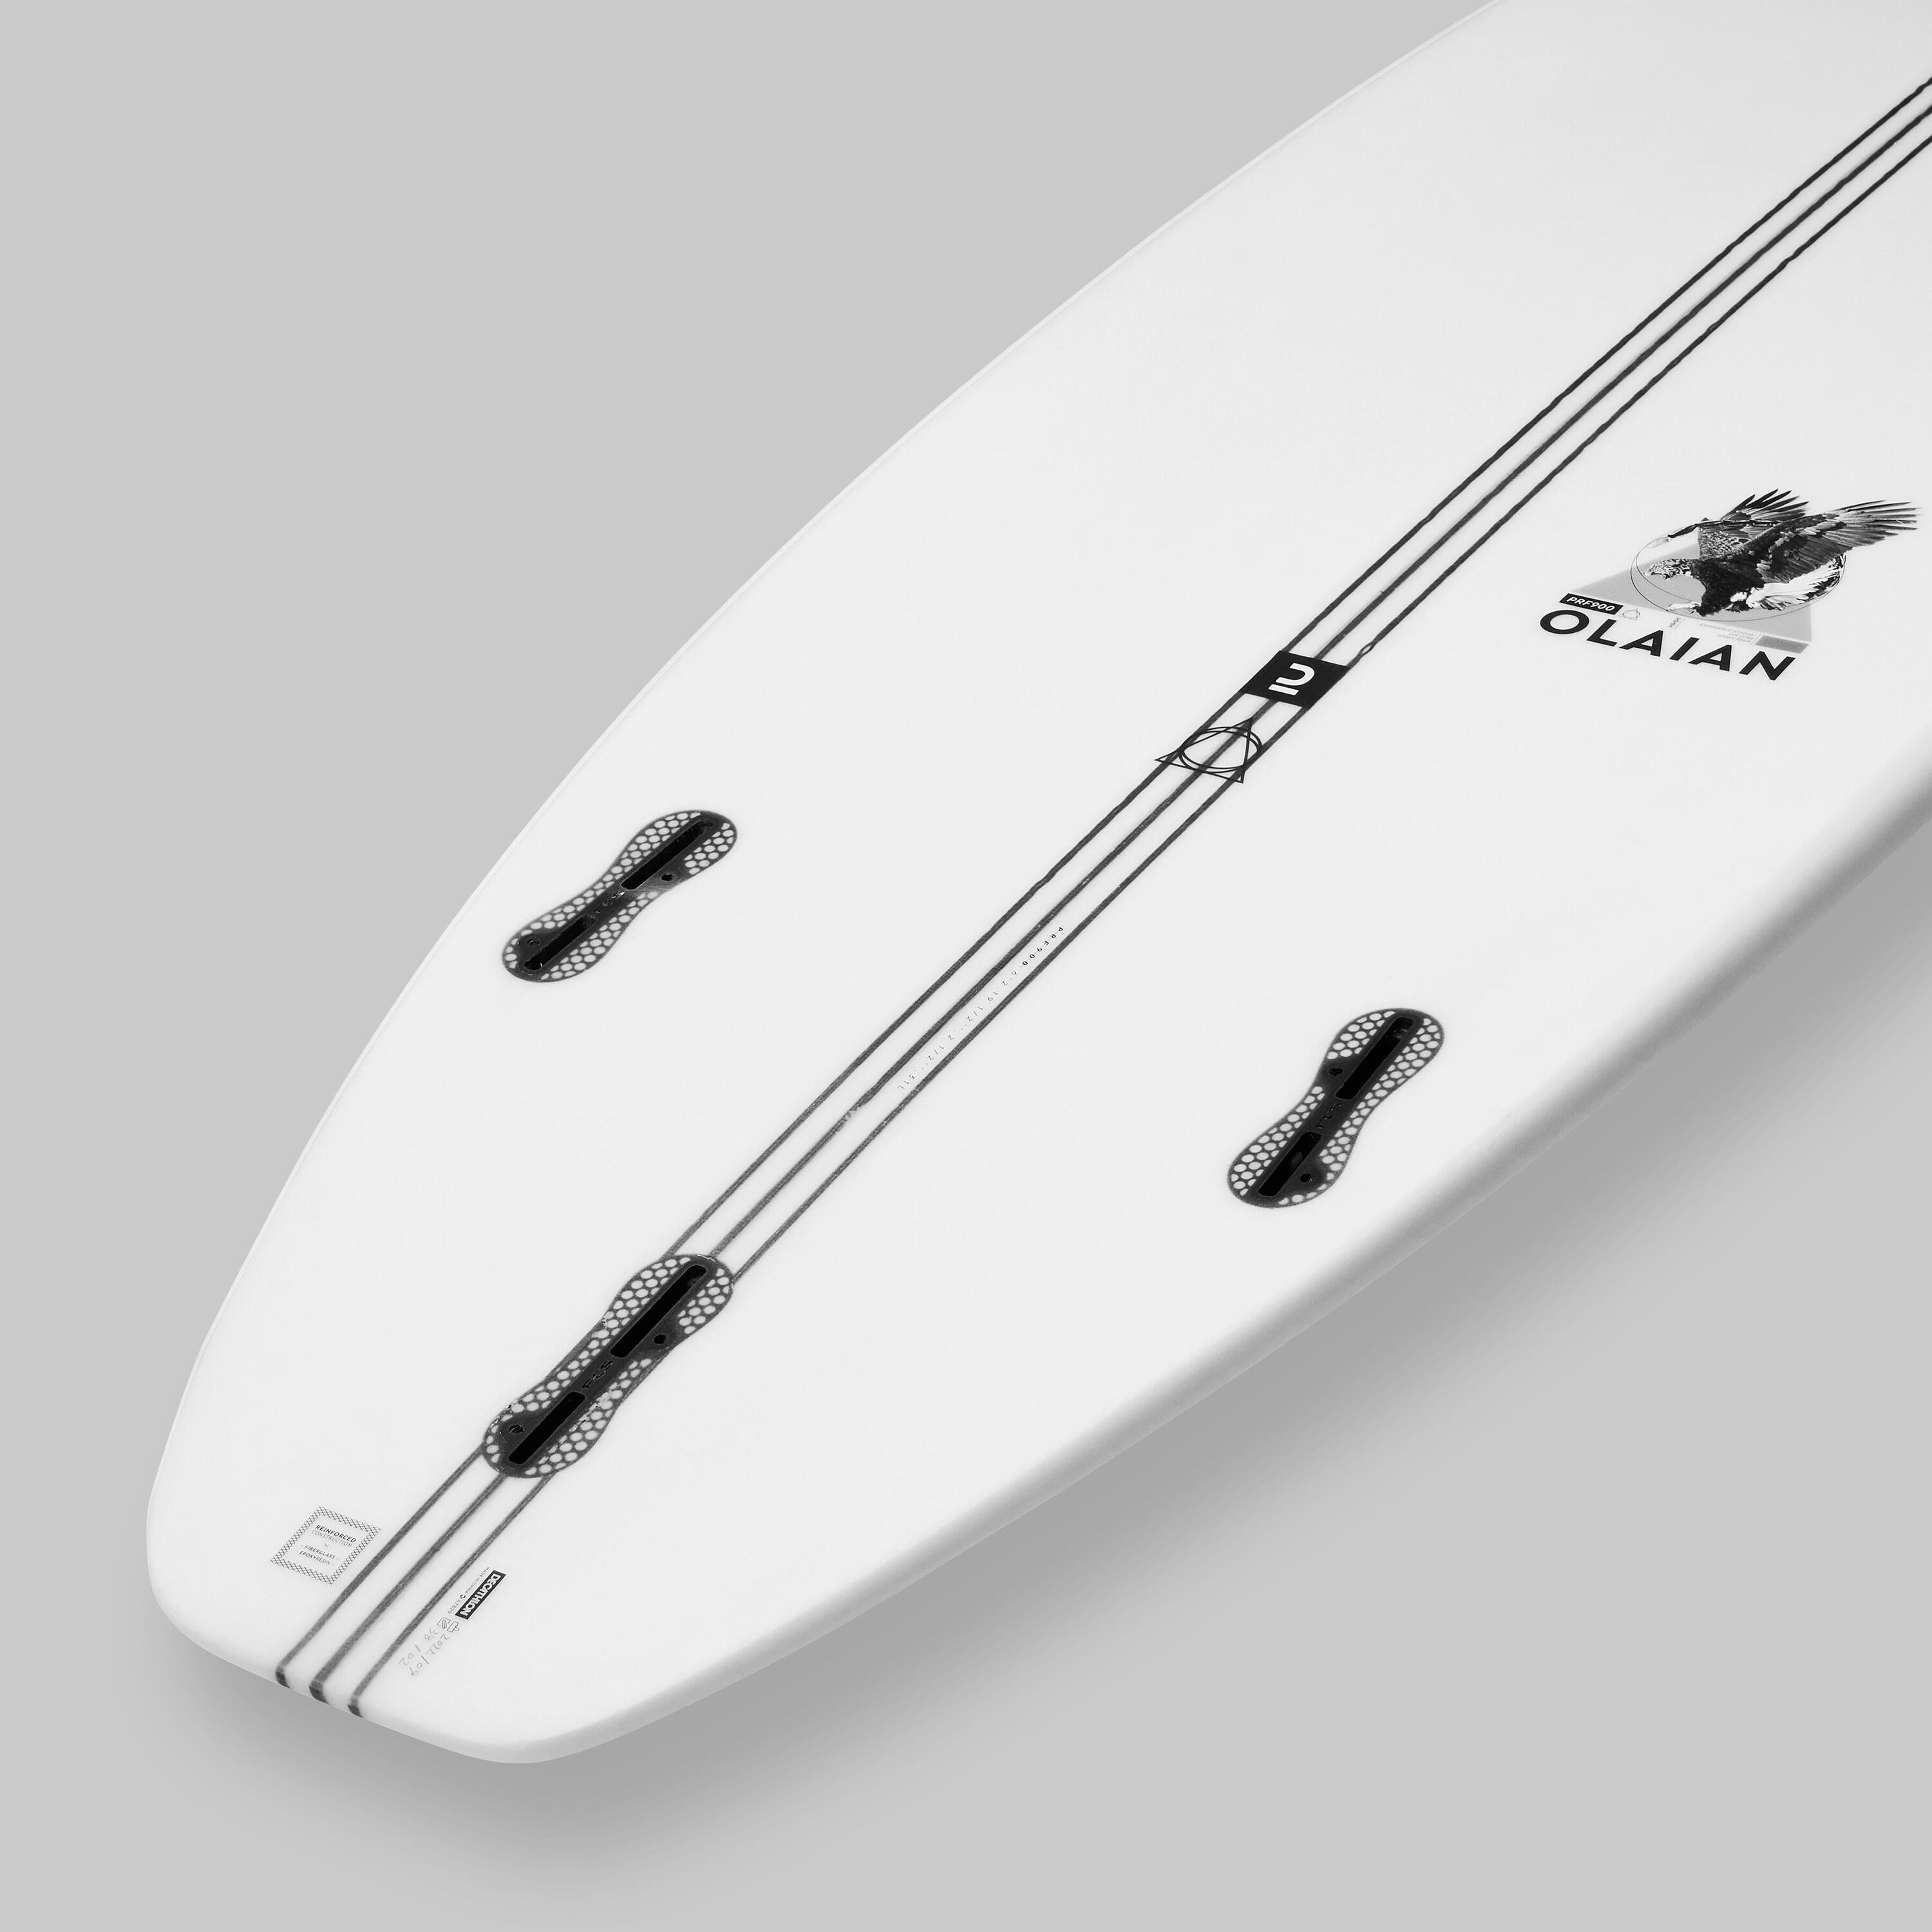 SHORTBOARD 900 PERF 6'2 31 L. Supplied without fins. 8/11